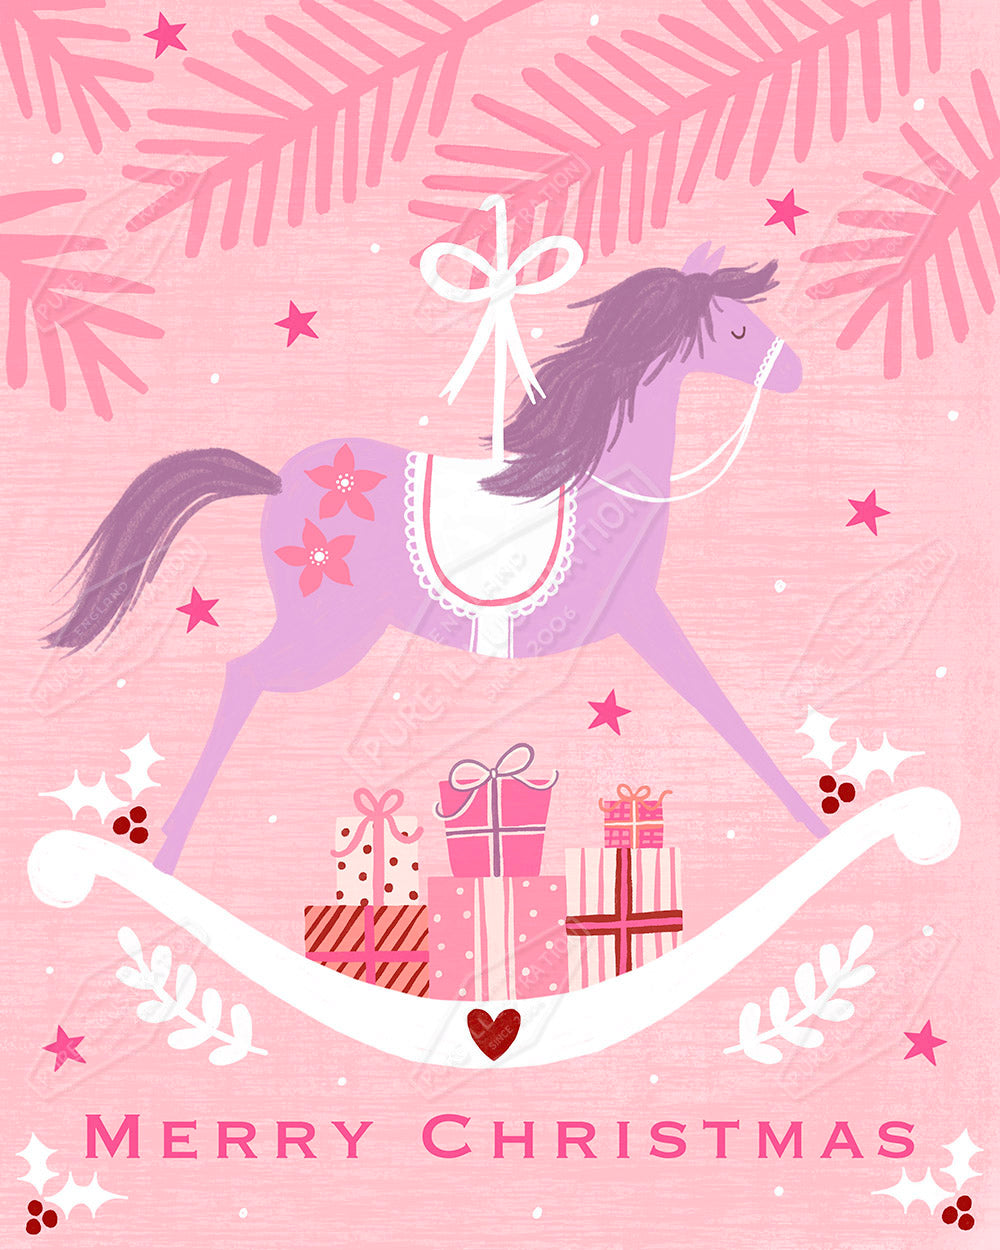 Christmas Rocking Horse Illustration by Sian Summerhayes - Pure Art Licensing Agency